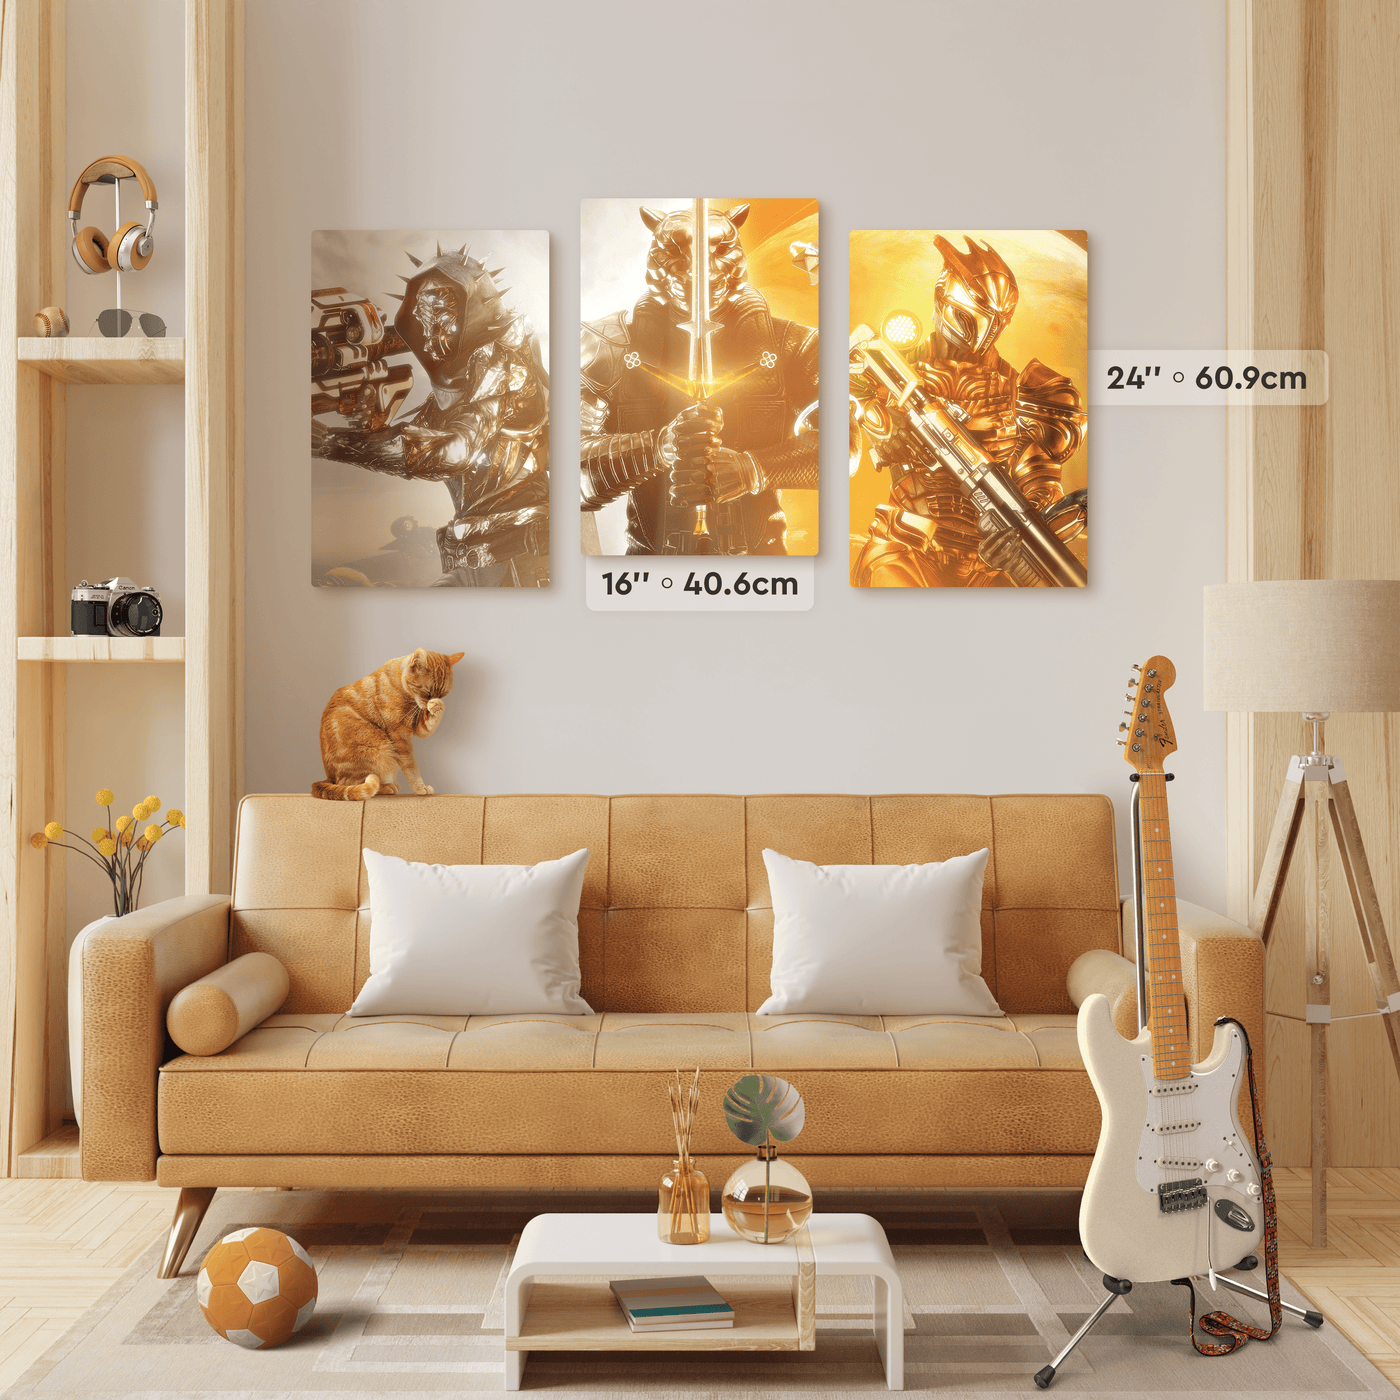 Custom print on three metal posters 16''x24'' in size in living room interior.